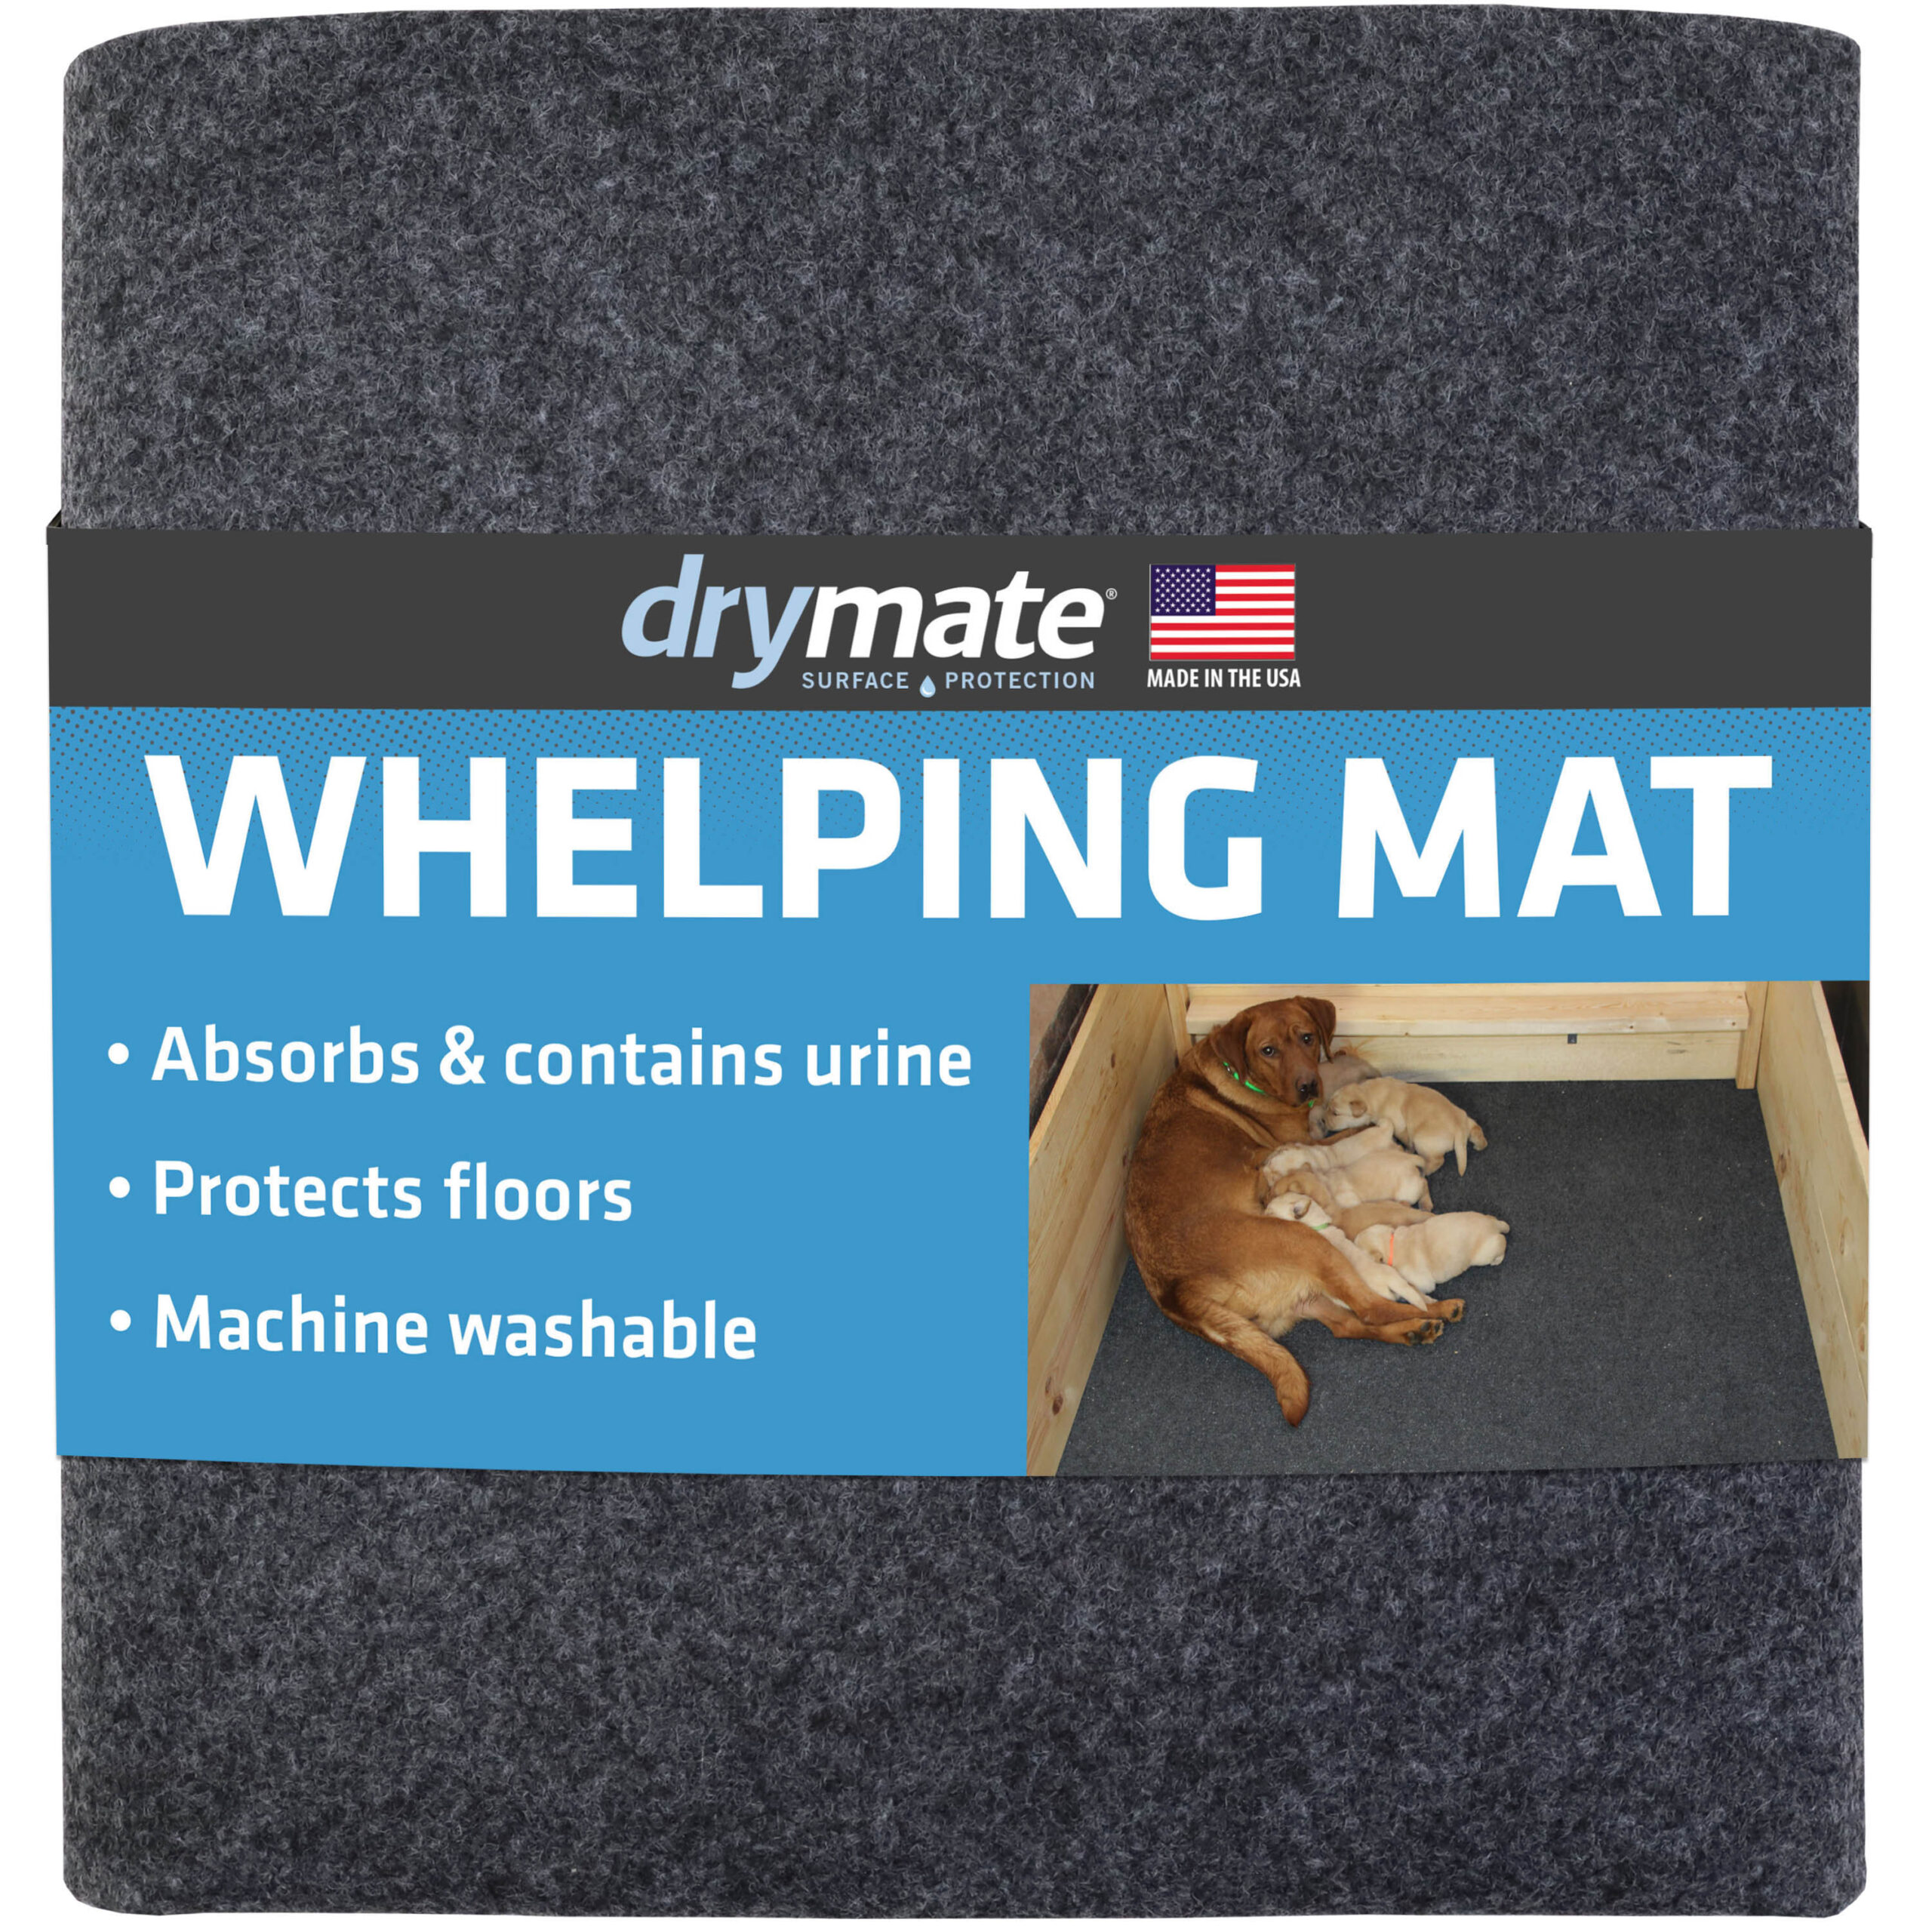 https://drymate.com/wp-content/uploads/2015/07/1-WMCB4850_Vs2-1-Whelping-mat-box-liner-puppy-pee-pad-absrobent-waterproof-washable-reusable-durable-scaled.jpg